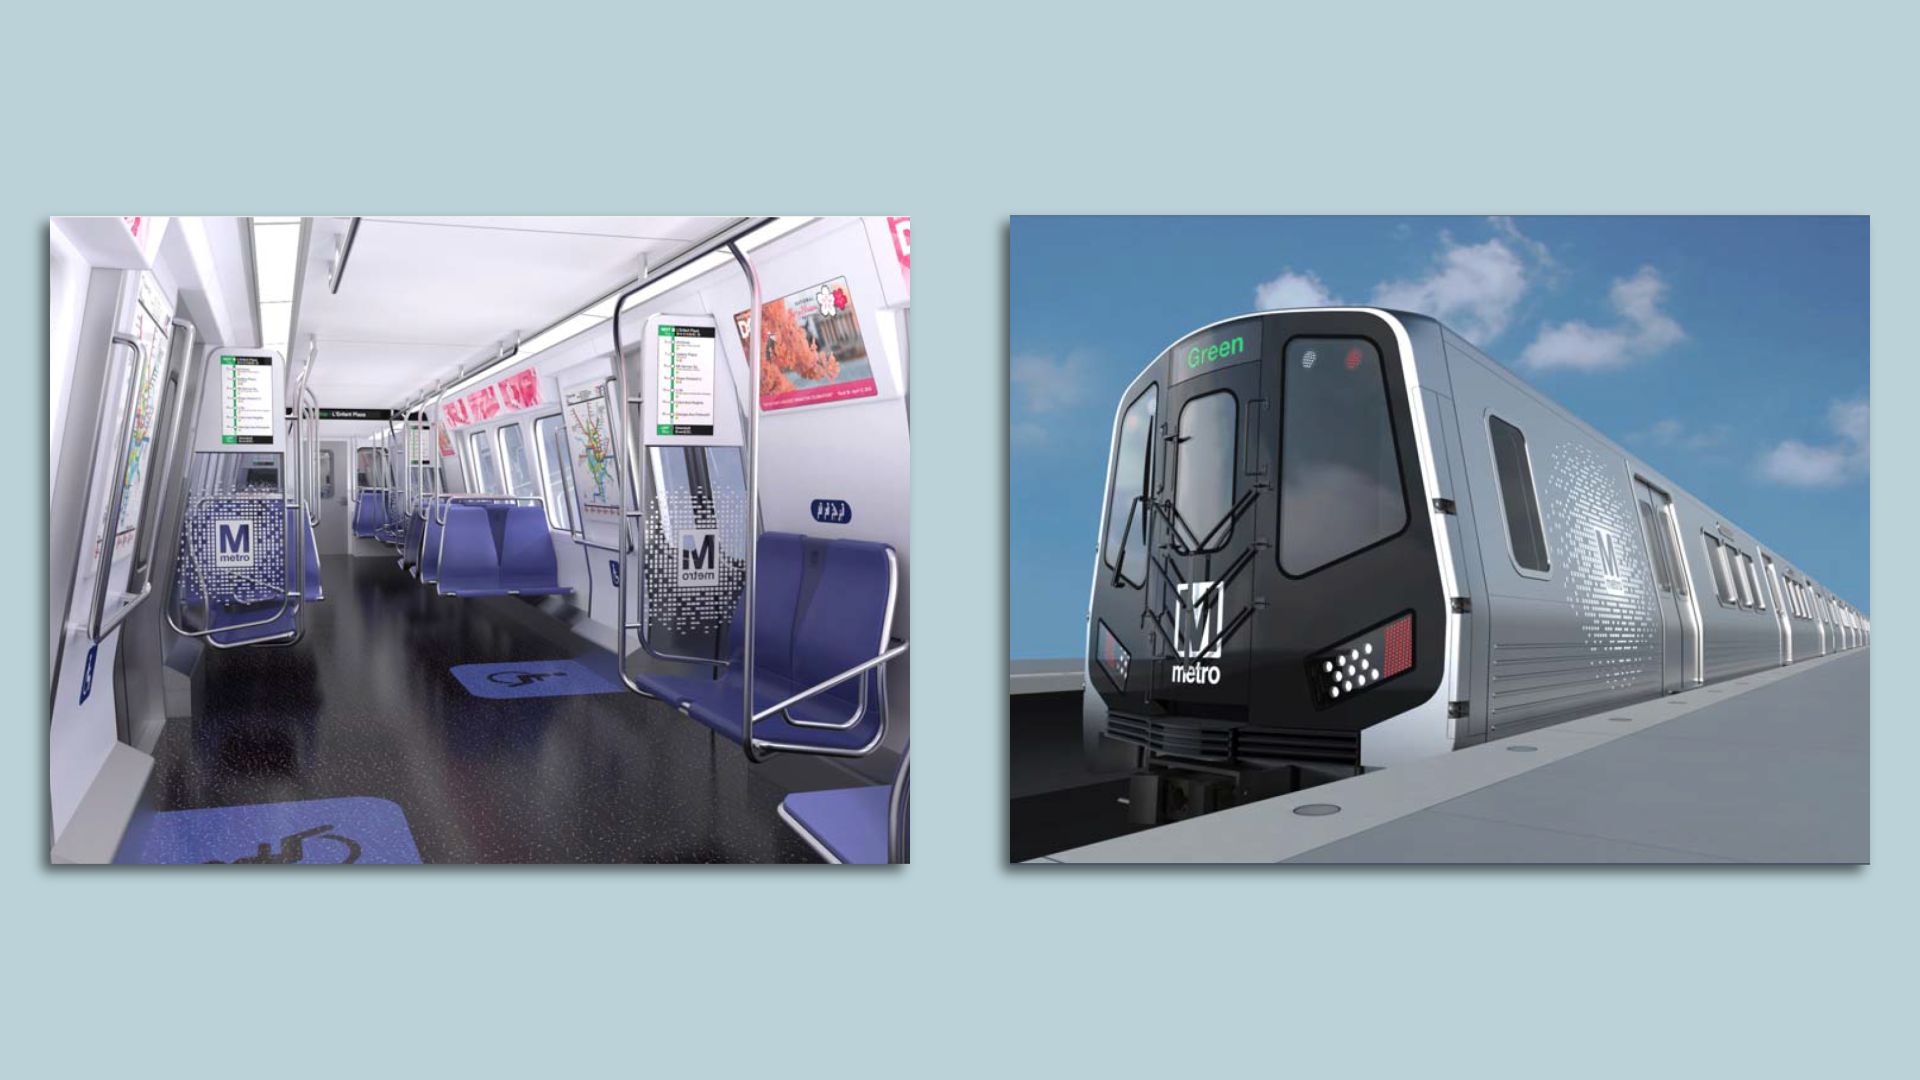 Renderings of interior and exterior of new 8000 series Metro trains